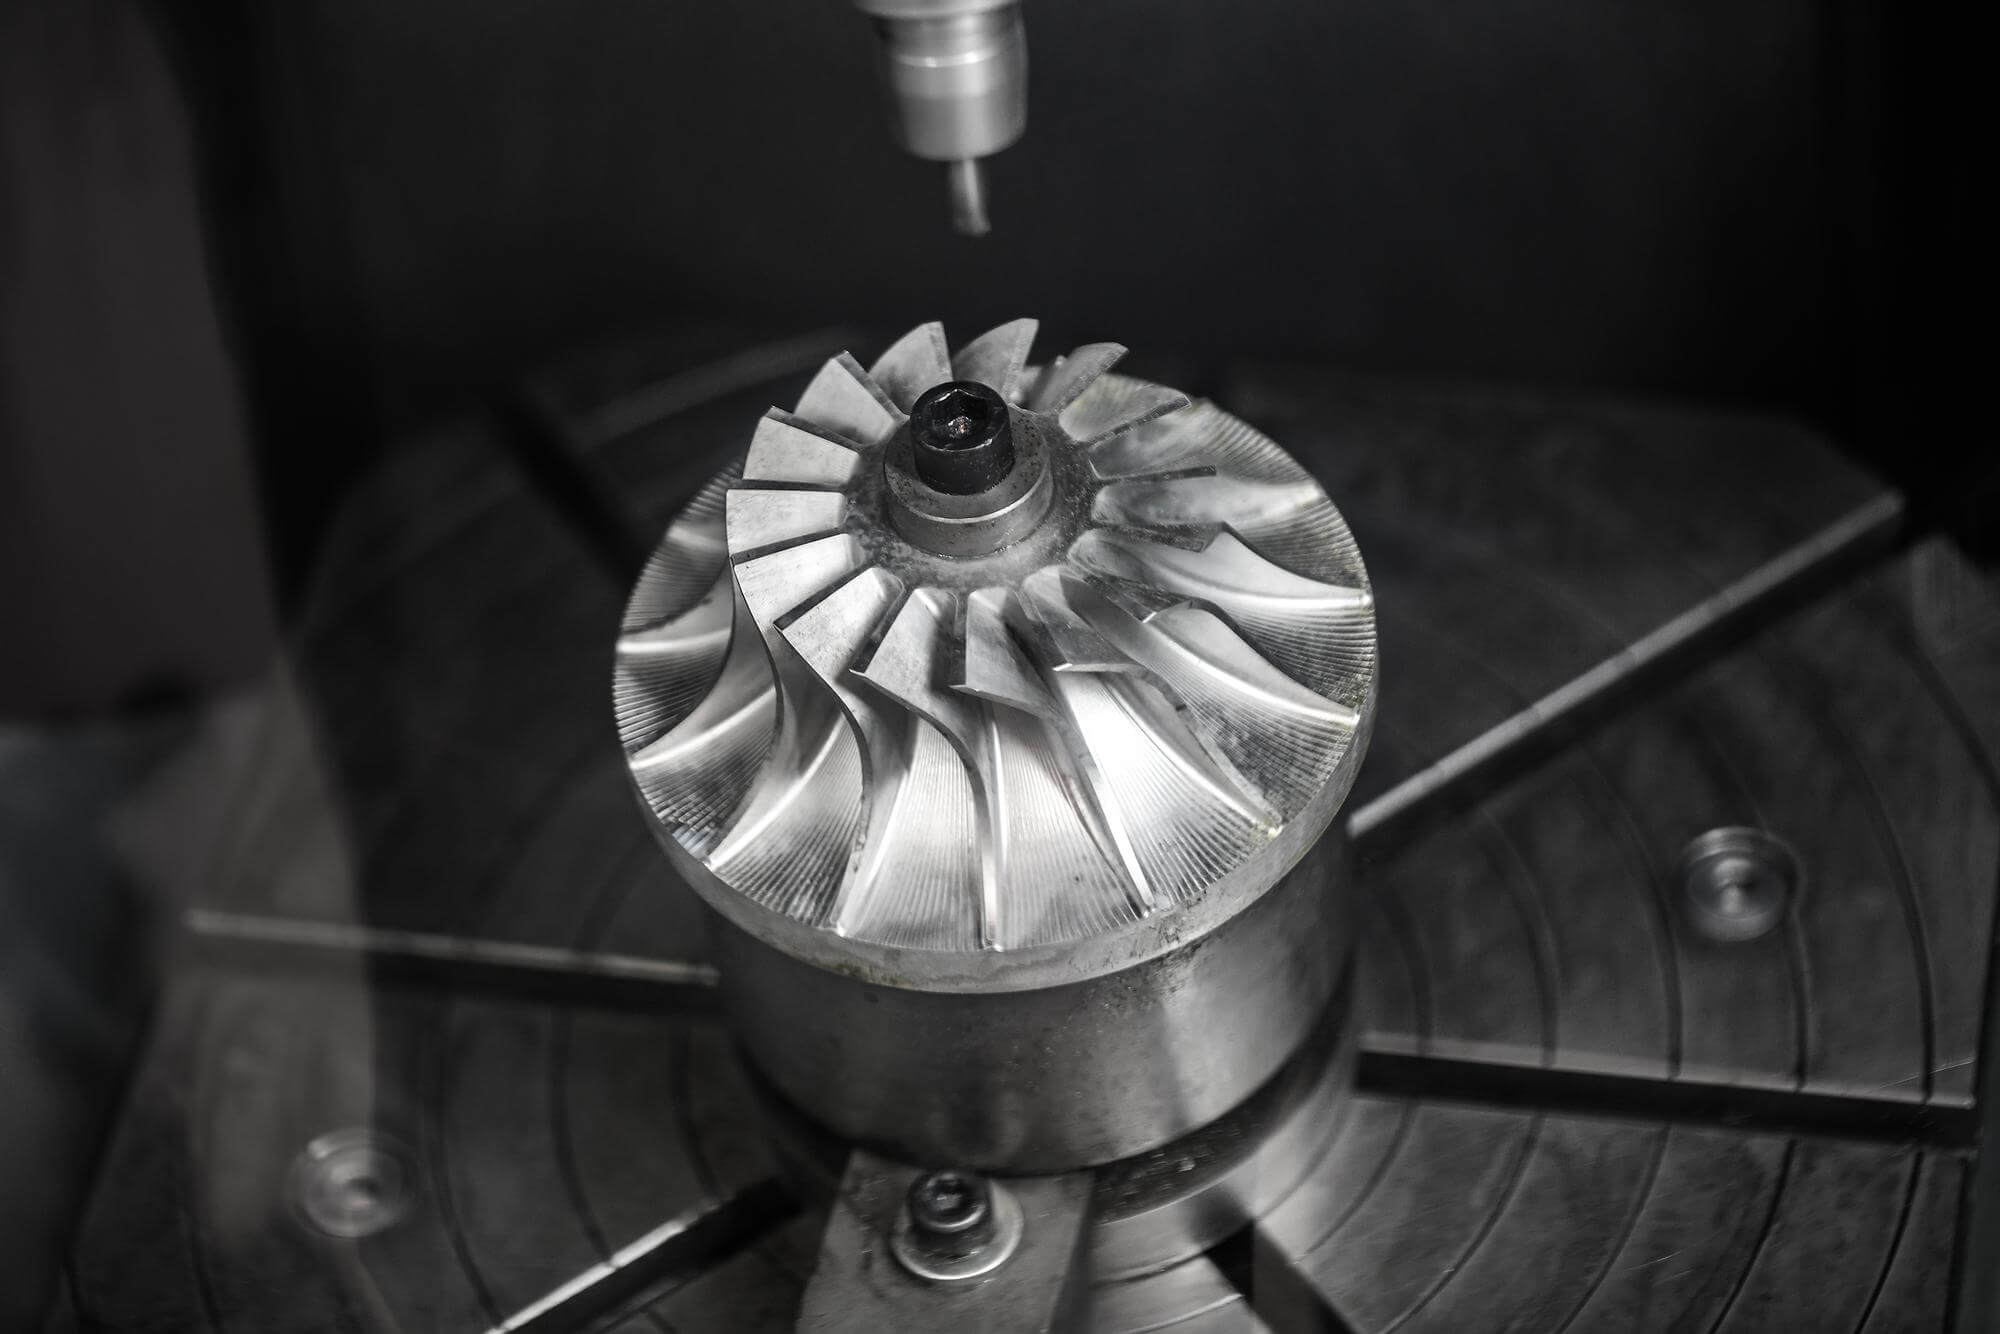 impellers and turbine blades for jet engines with CNC Machining